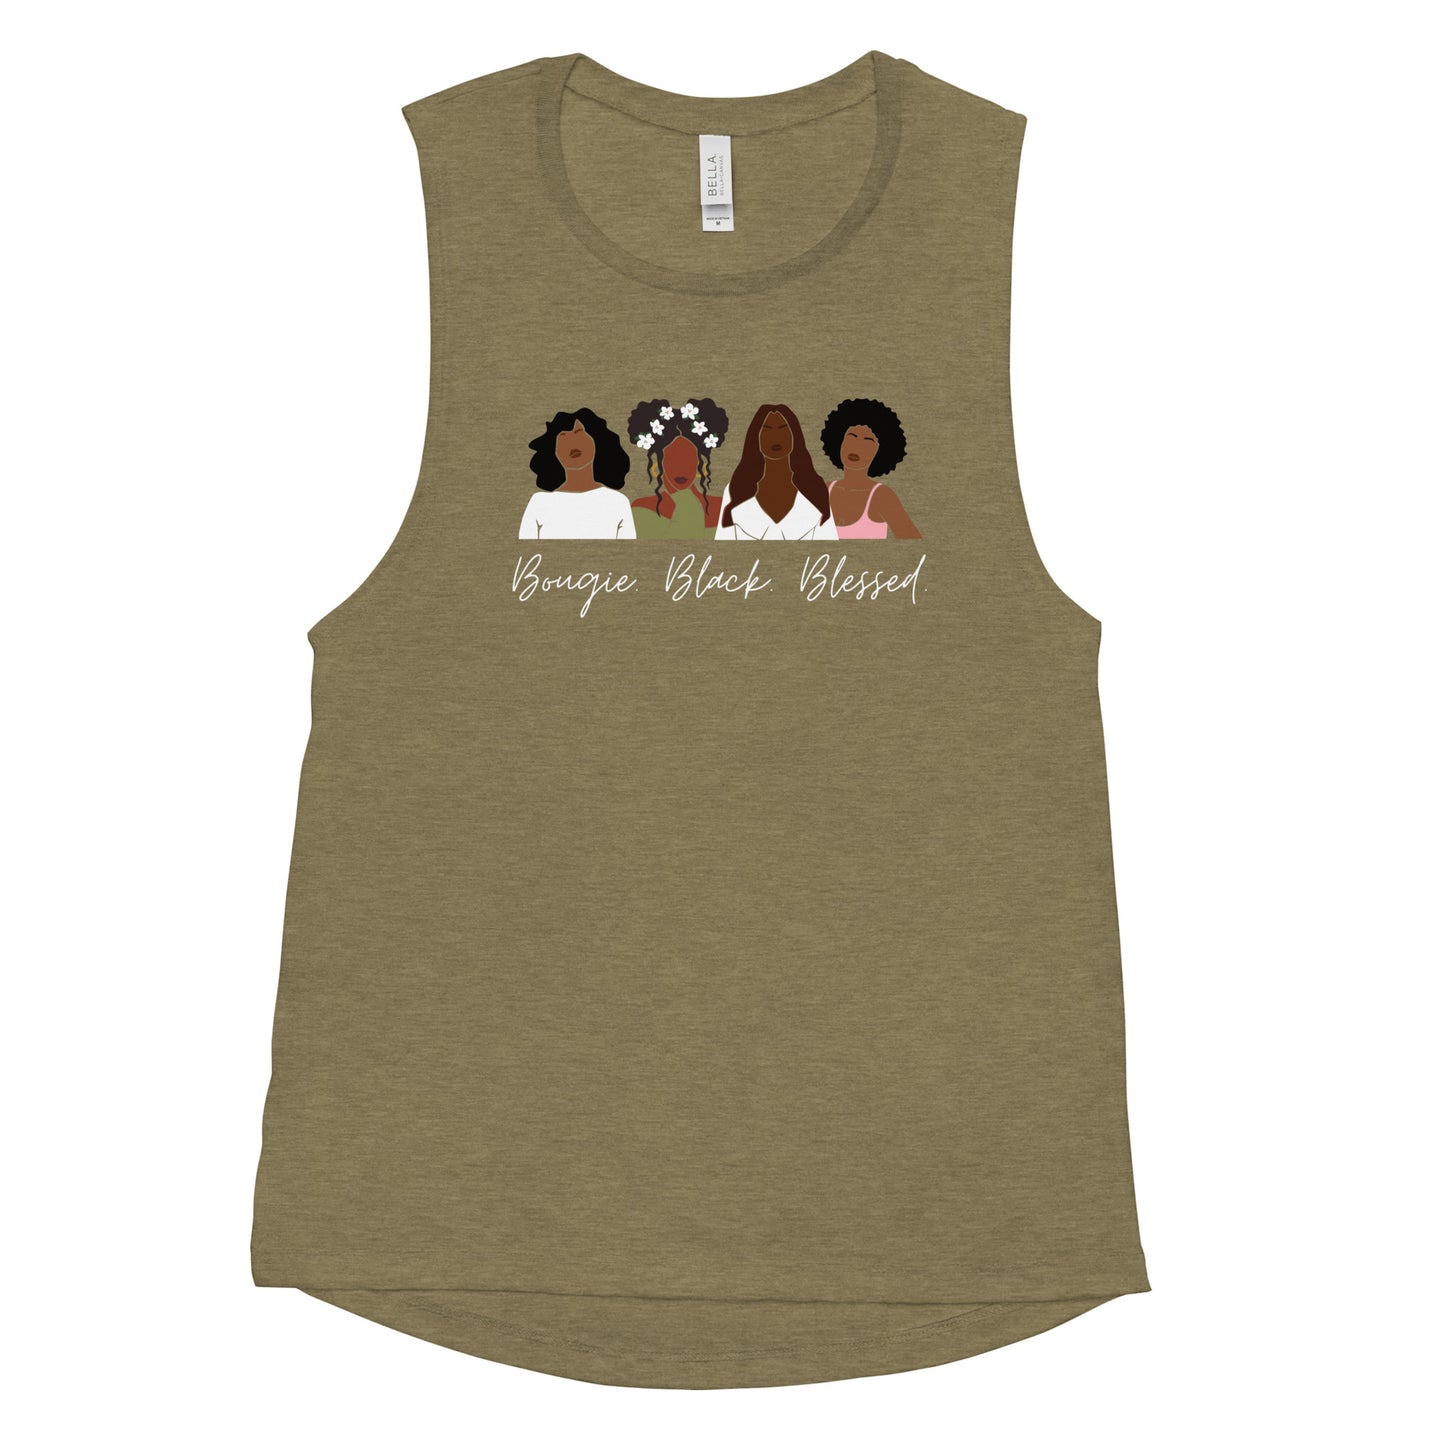 Bougie. Black. Blessed. Tank